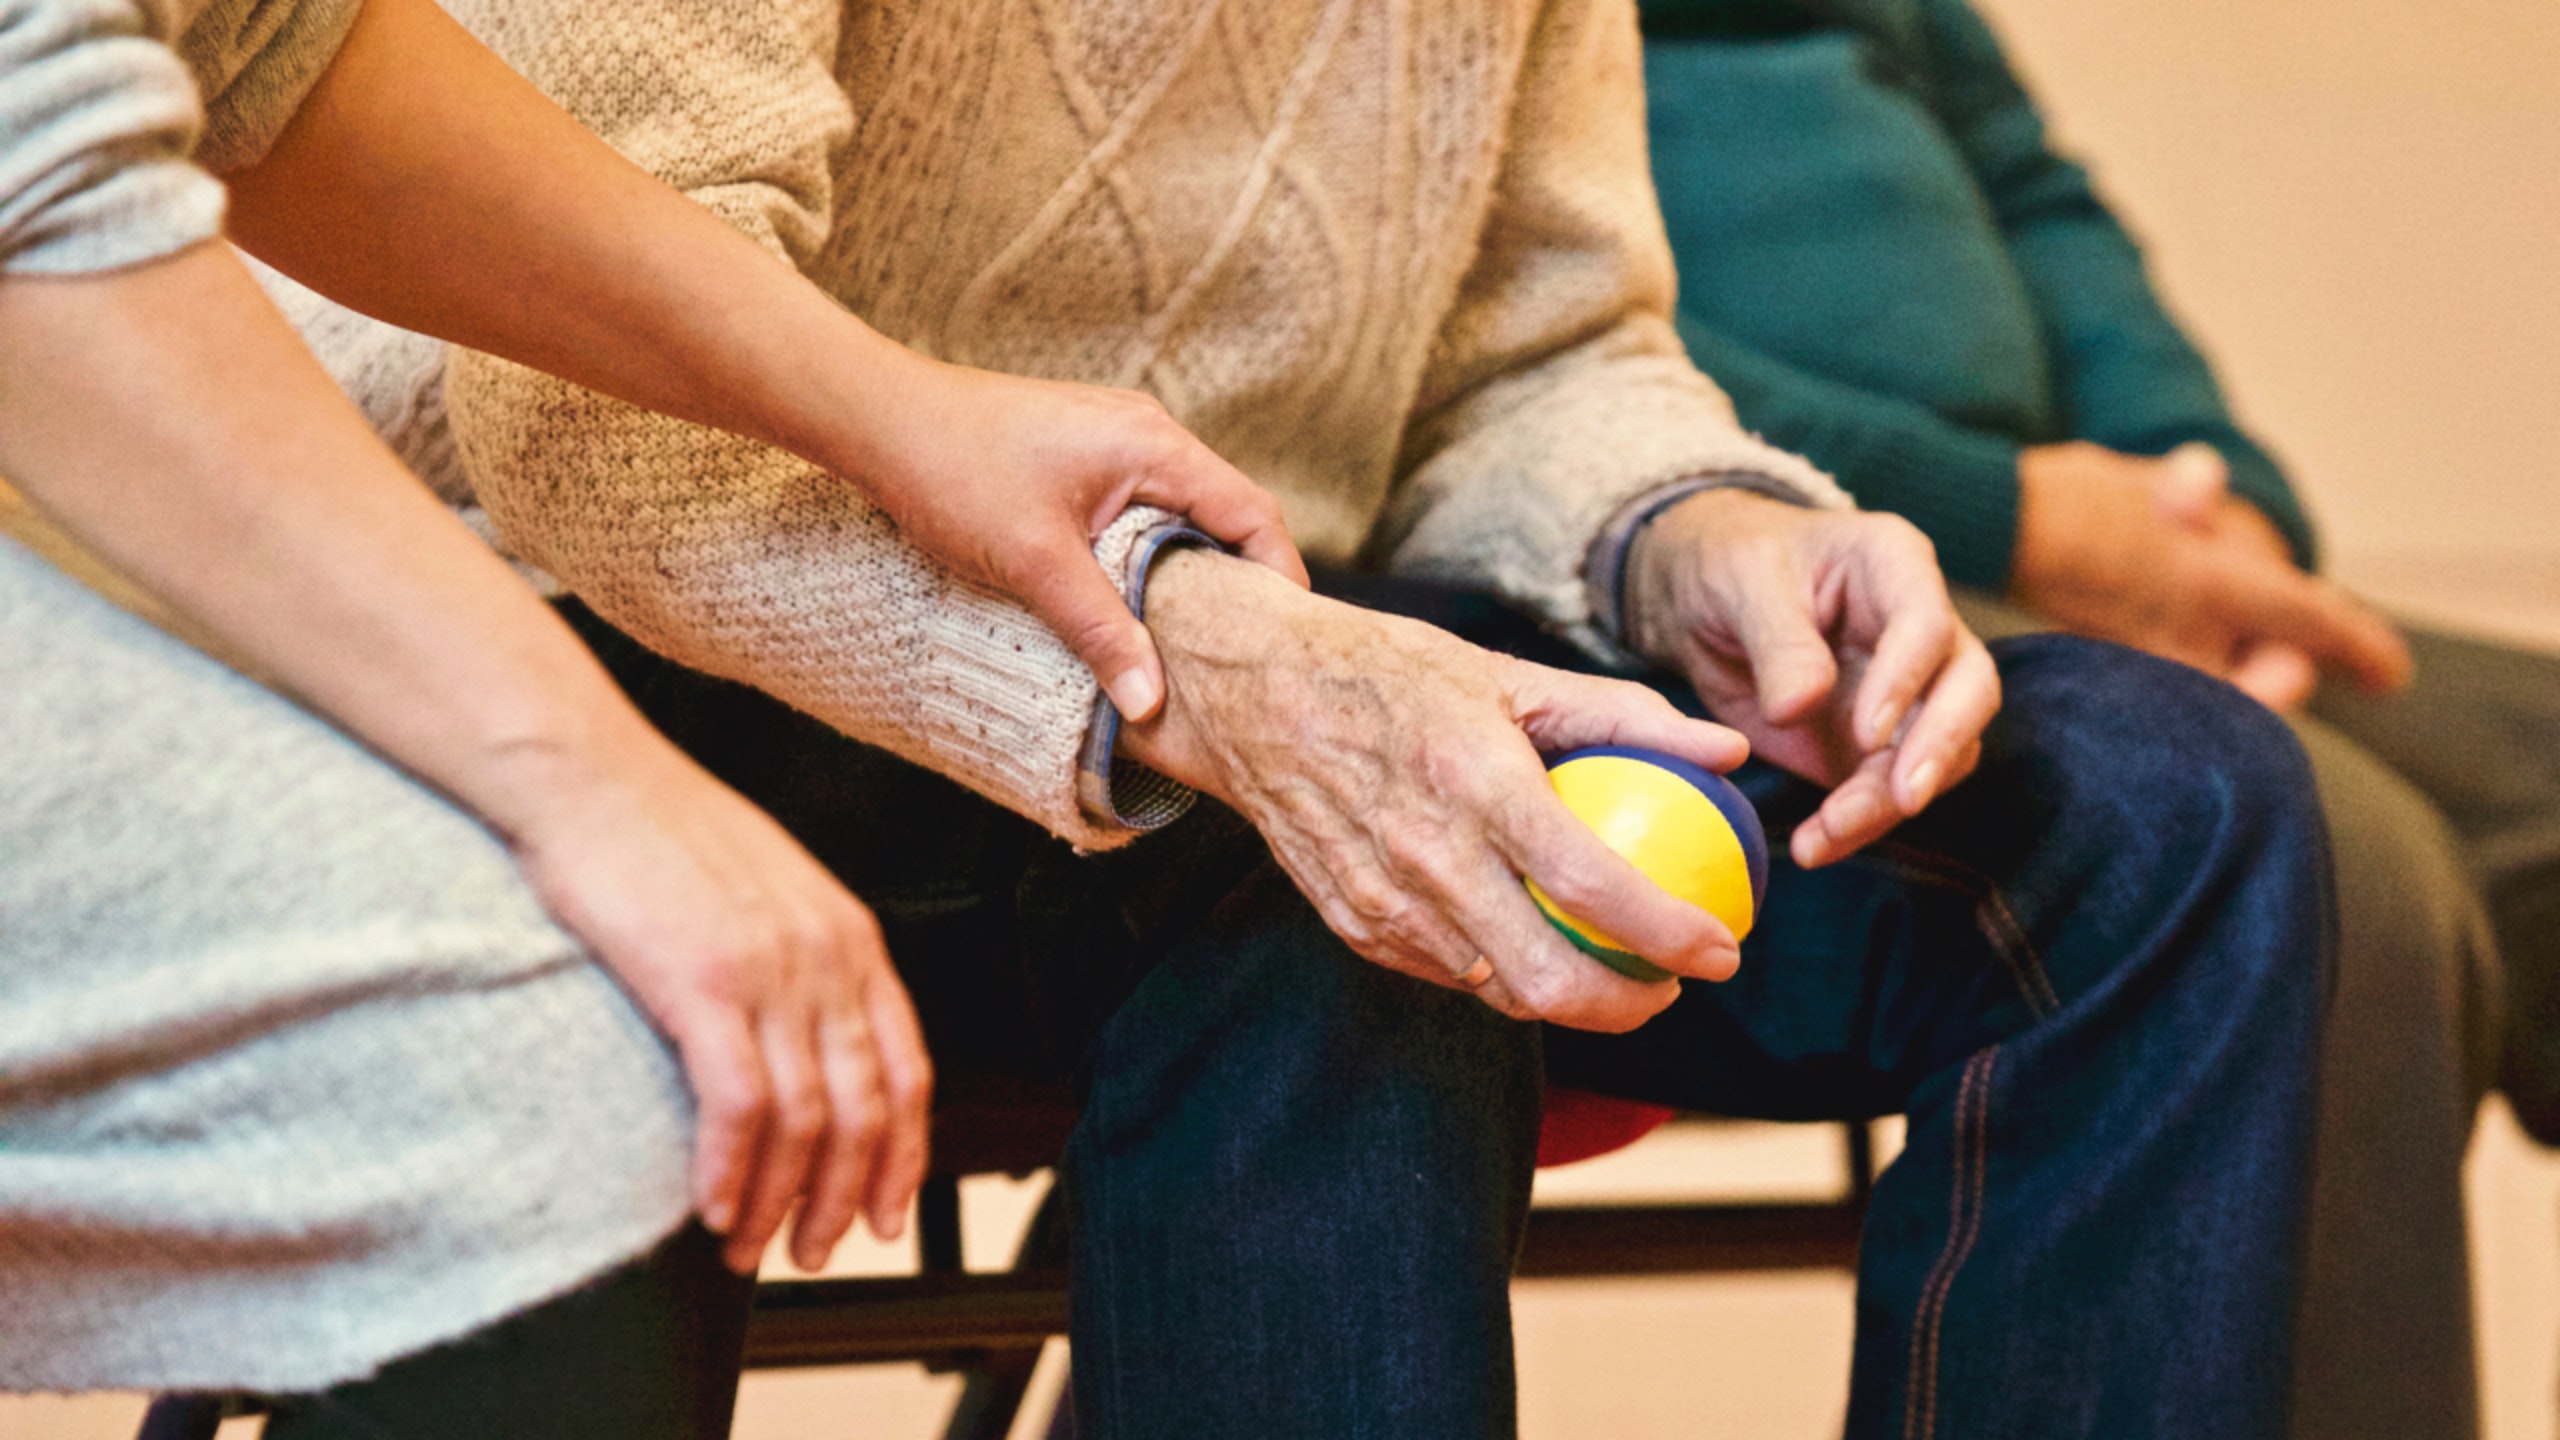 Seniors in long-term care homes need to be protected